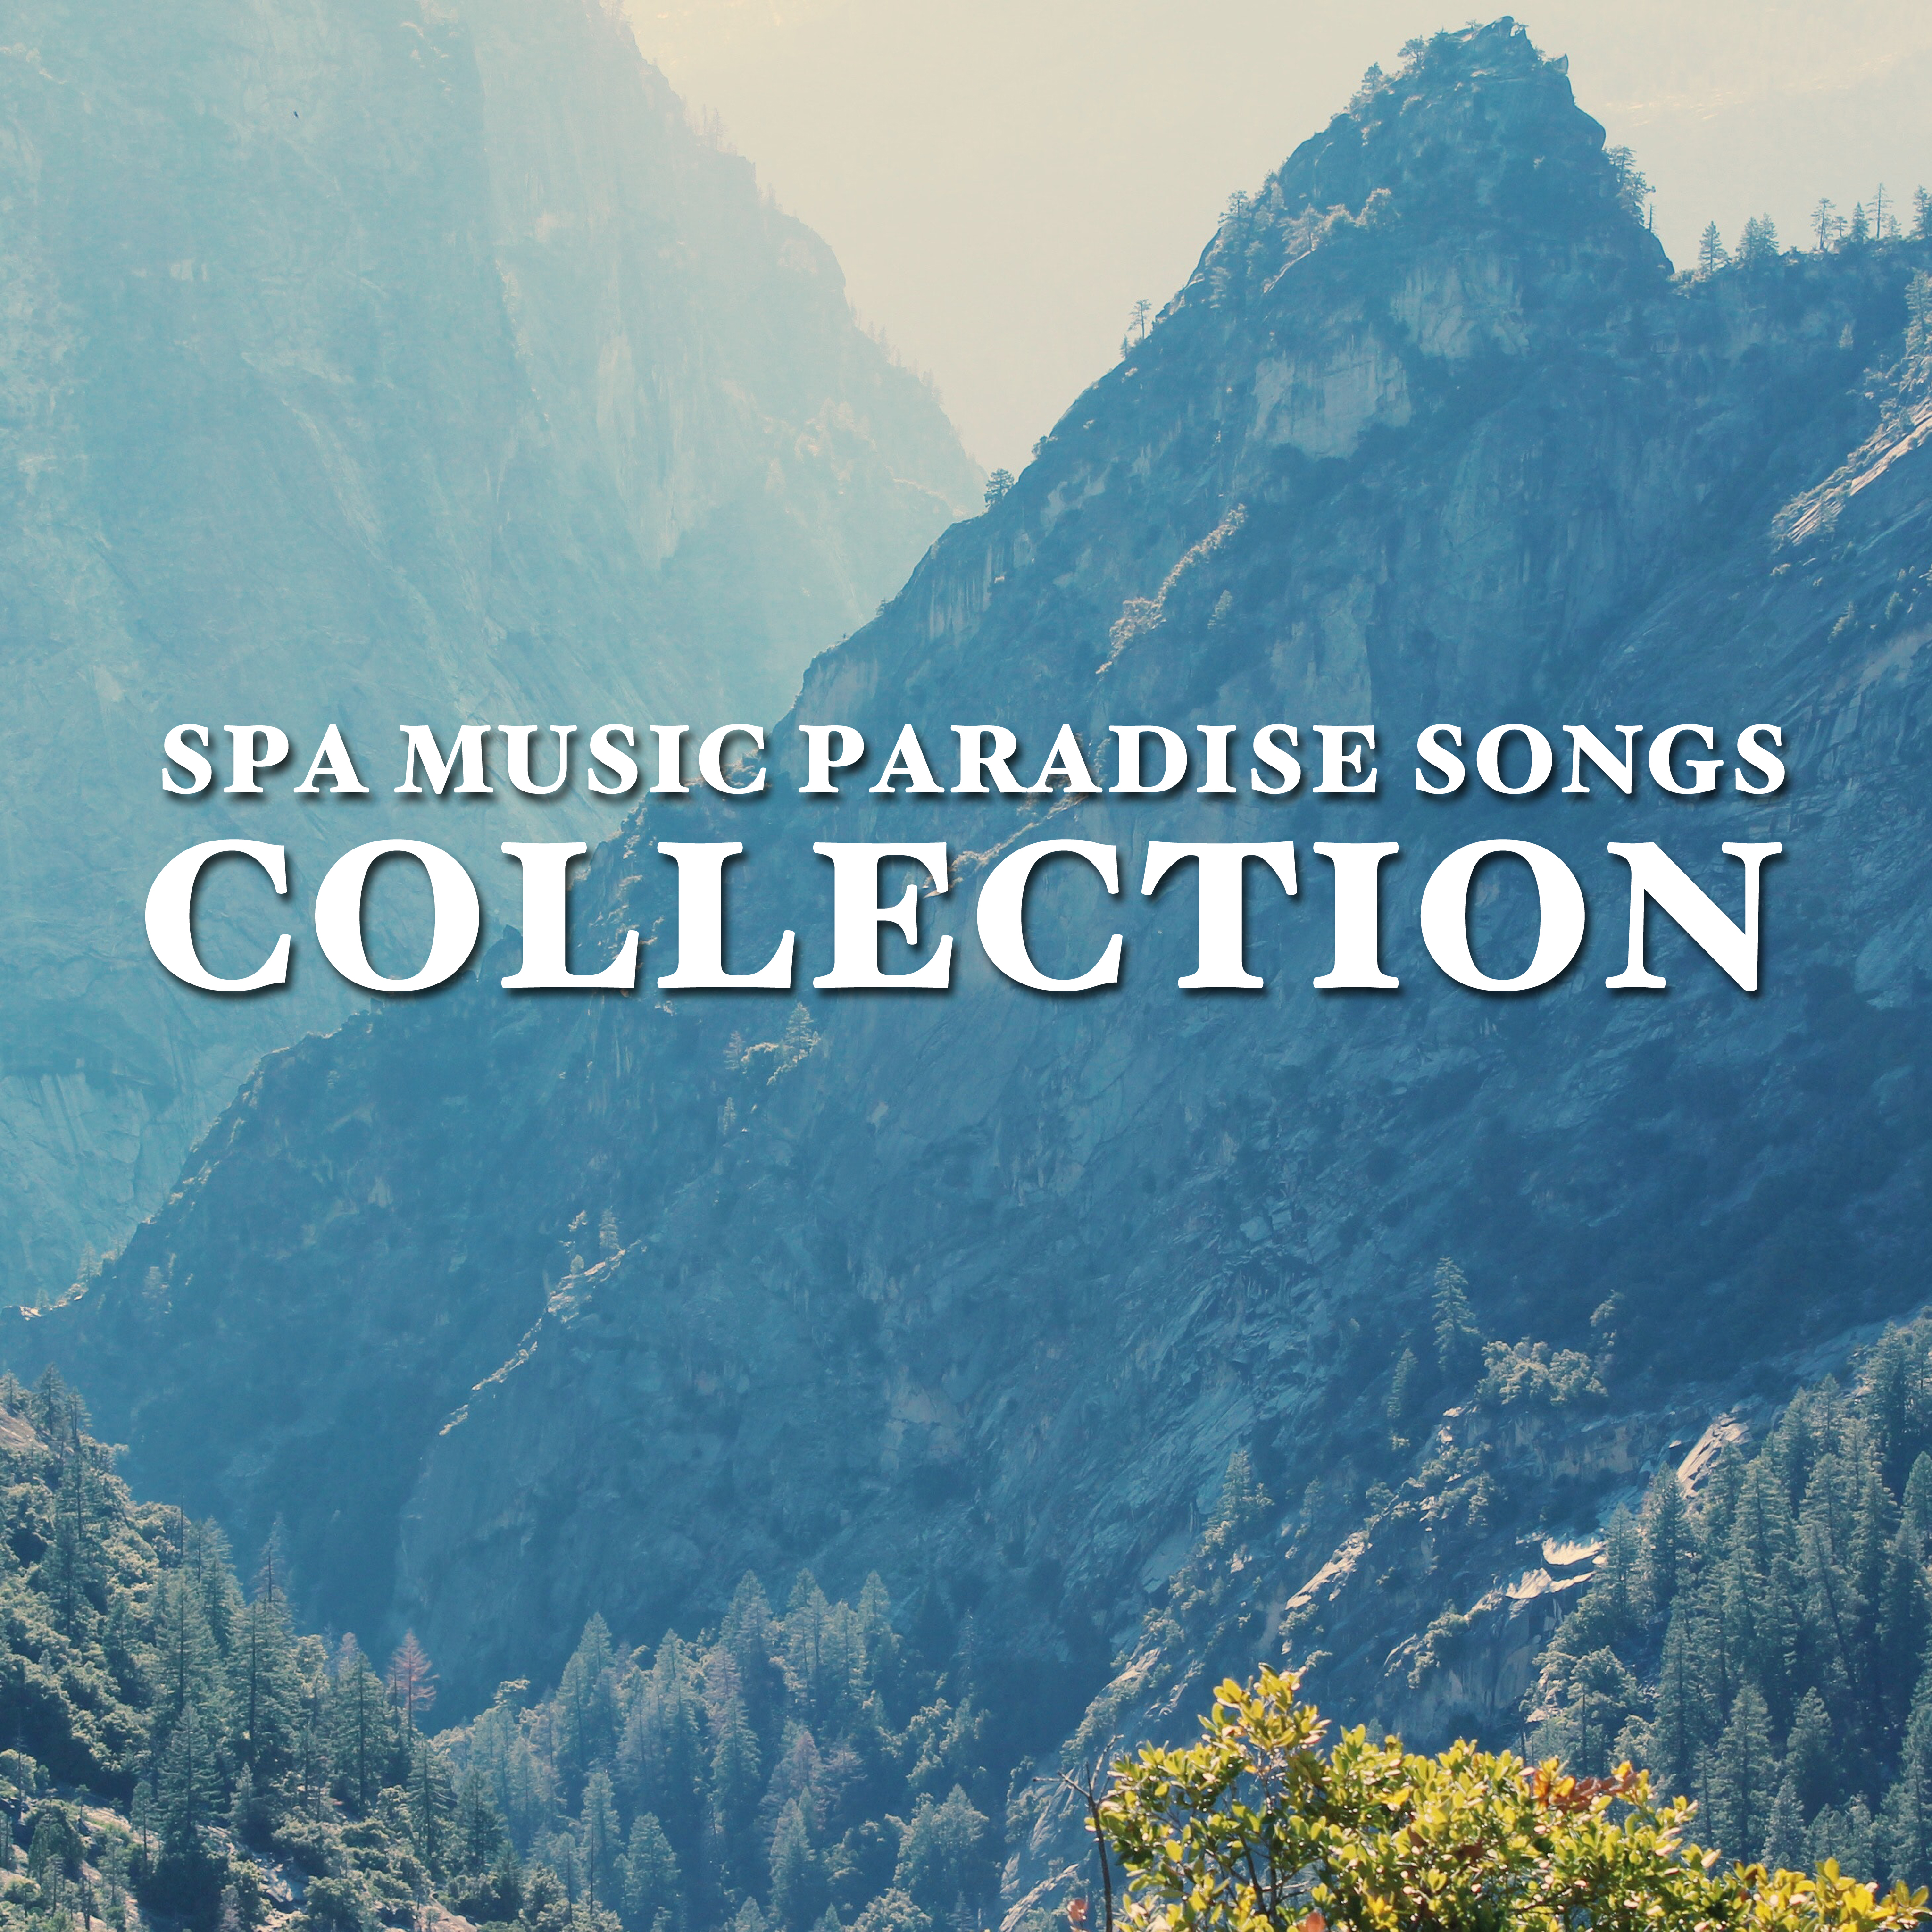 16 Spa Music Paradise Songs Collection